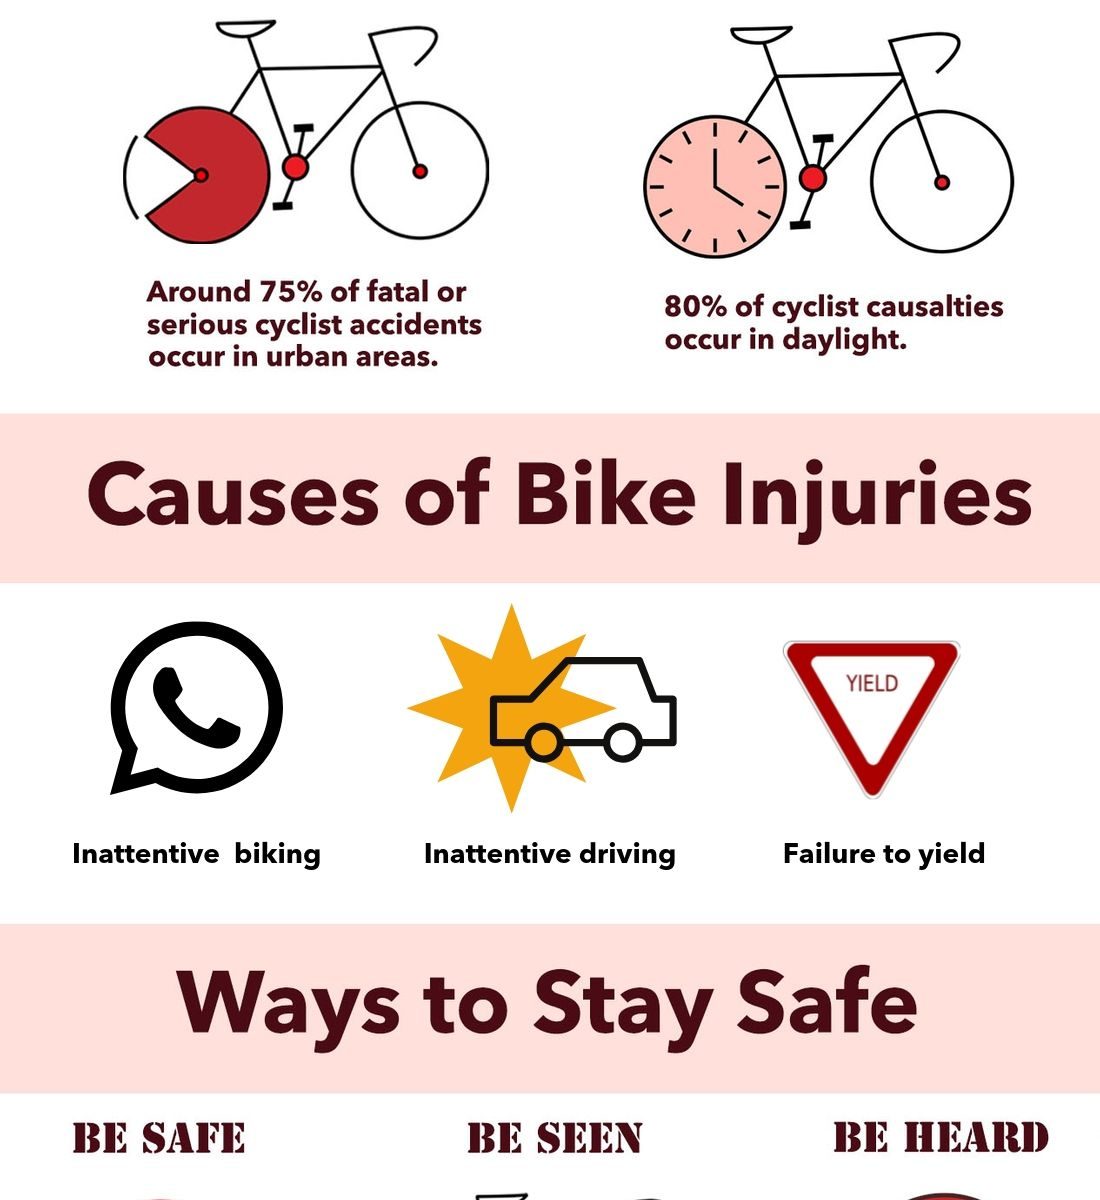 INFOGRAPHIC: Bicycle safety tips - 191006 BIKE SAFETY GRAPHIC 1100x1200